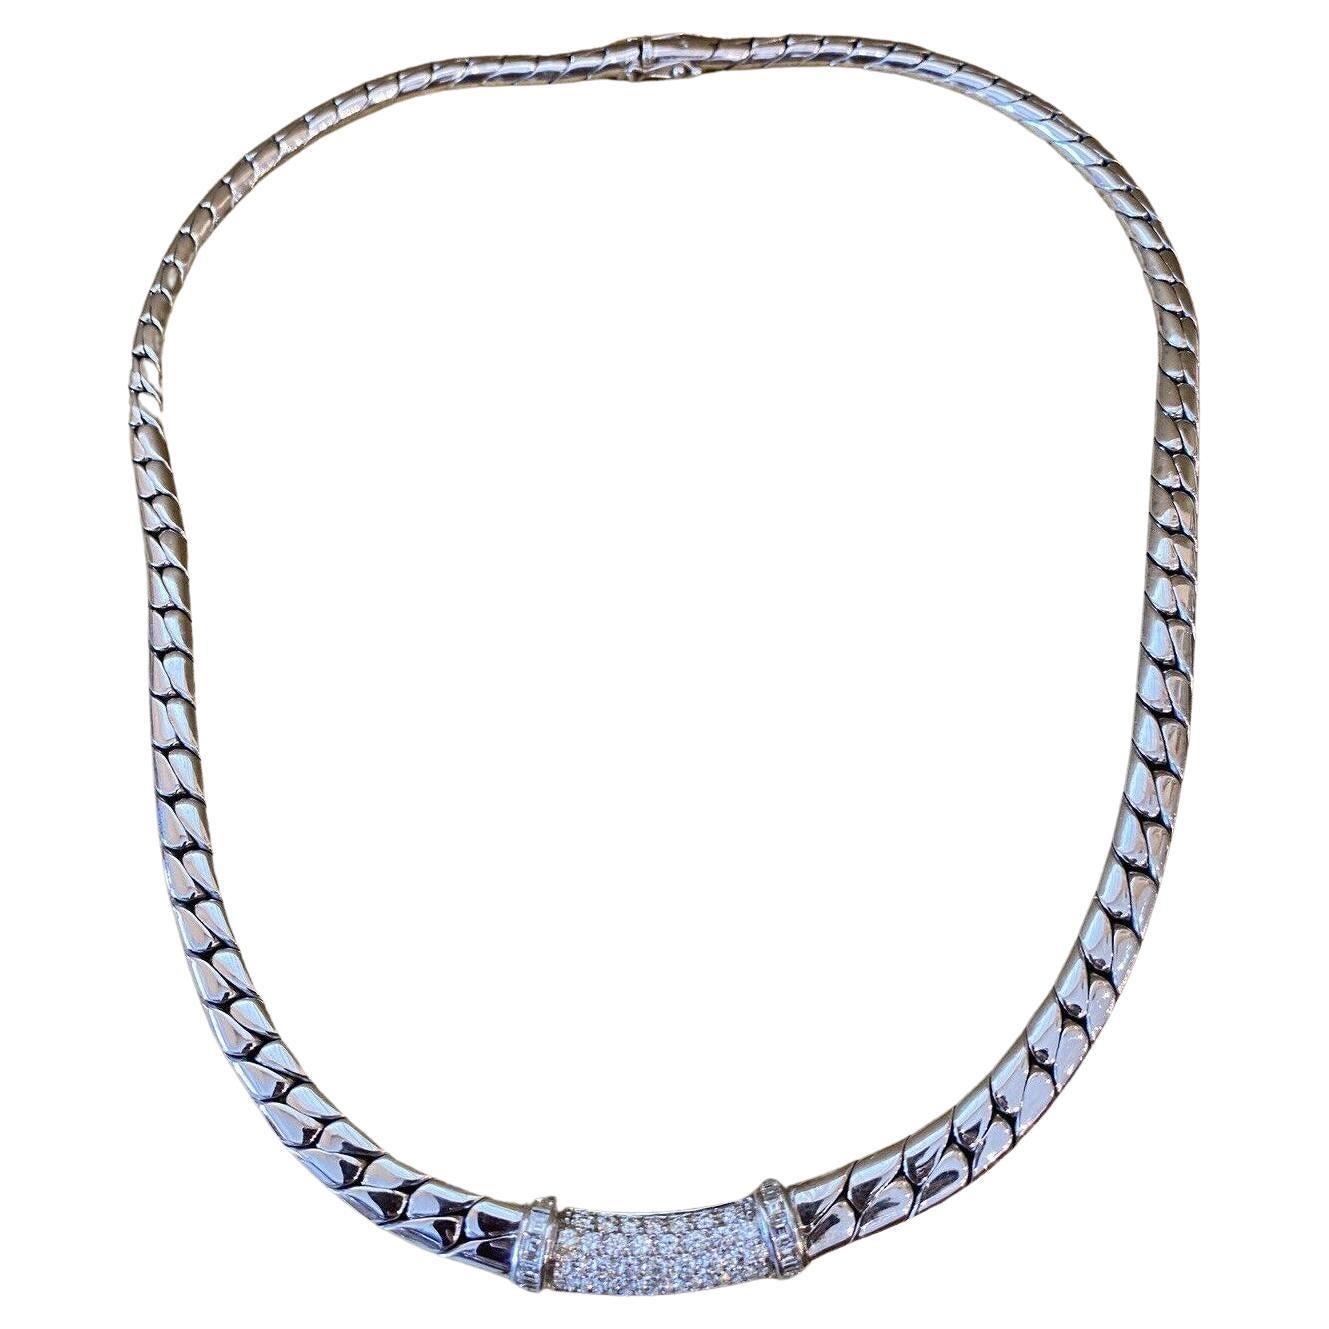 PICCHIOTTI Pavé Diamond Curb Link Necklace in 18k White Gold